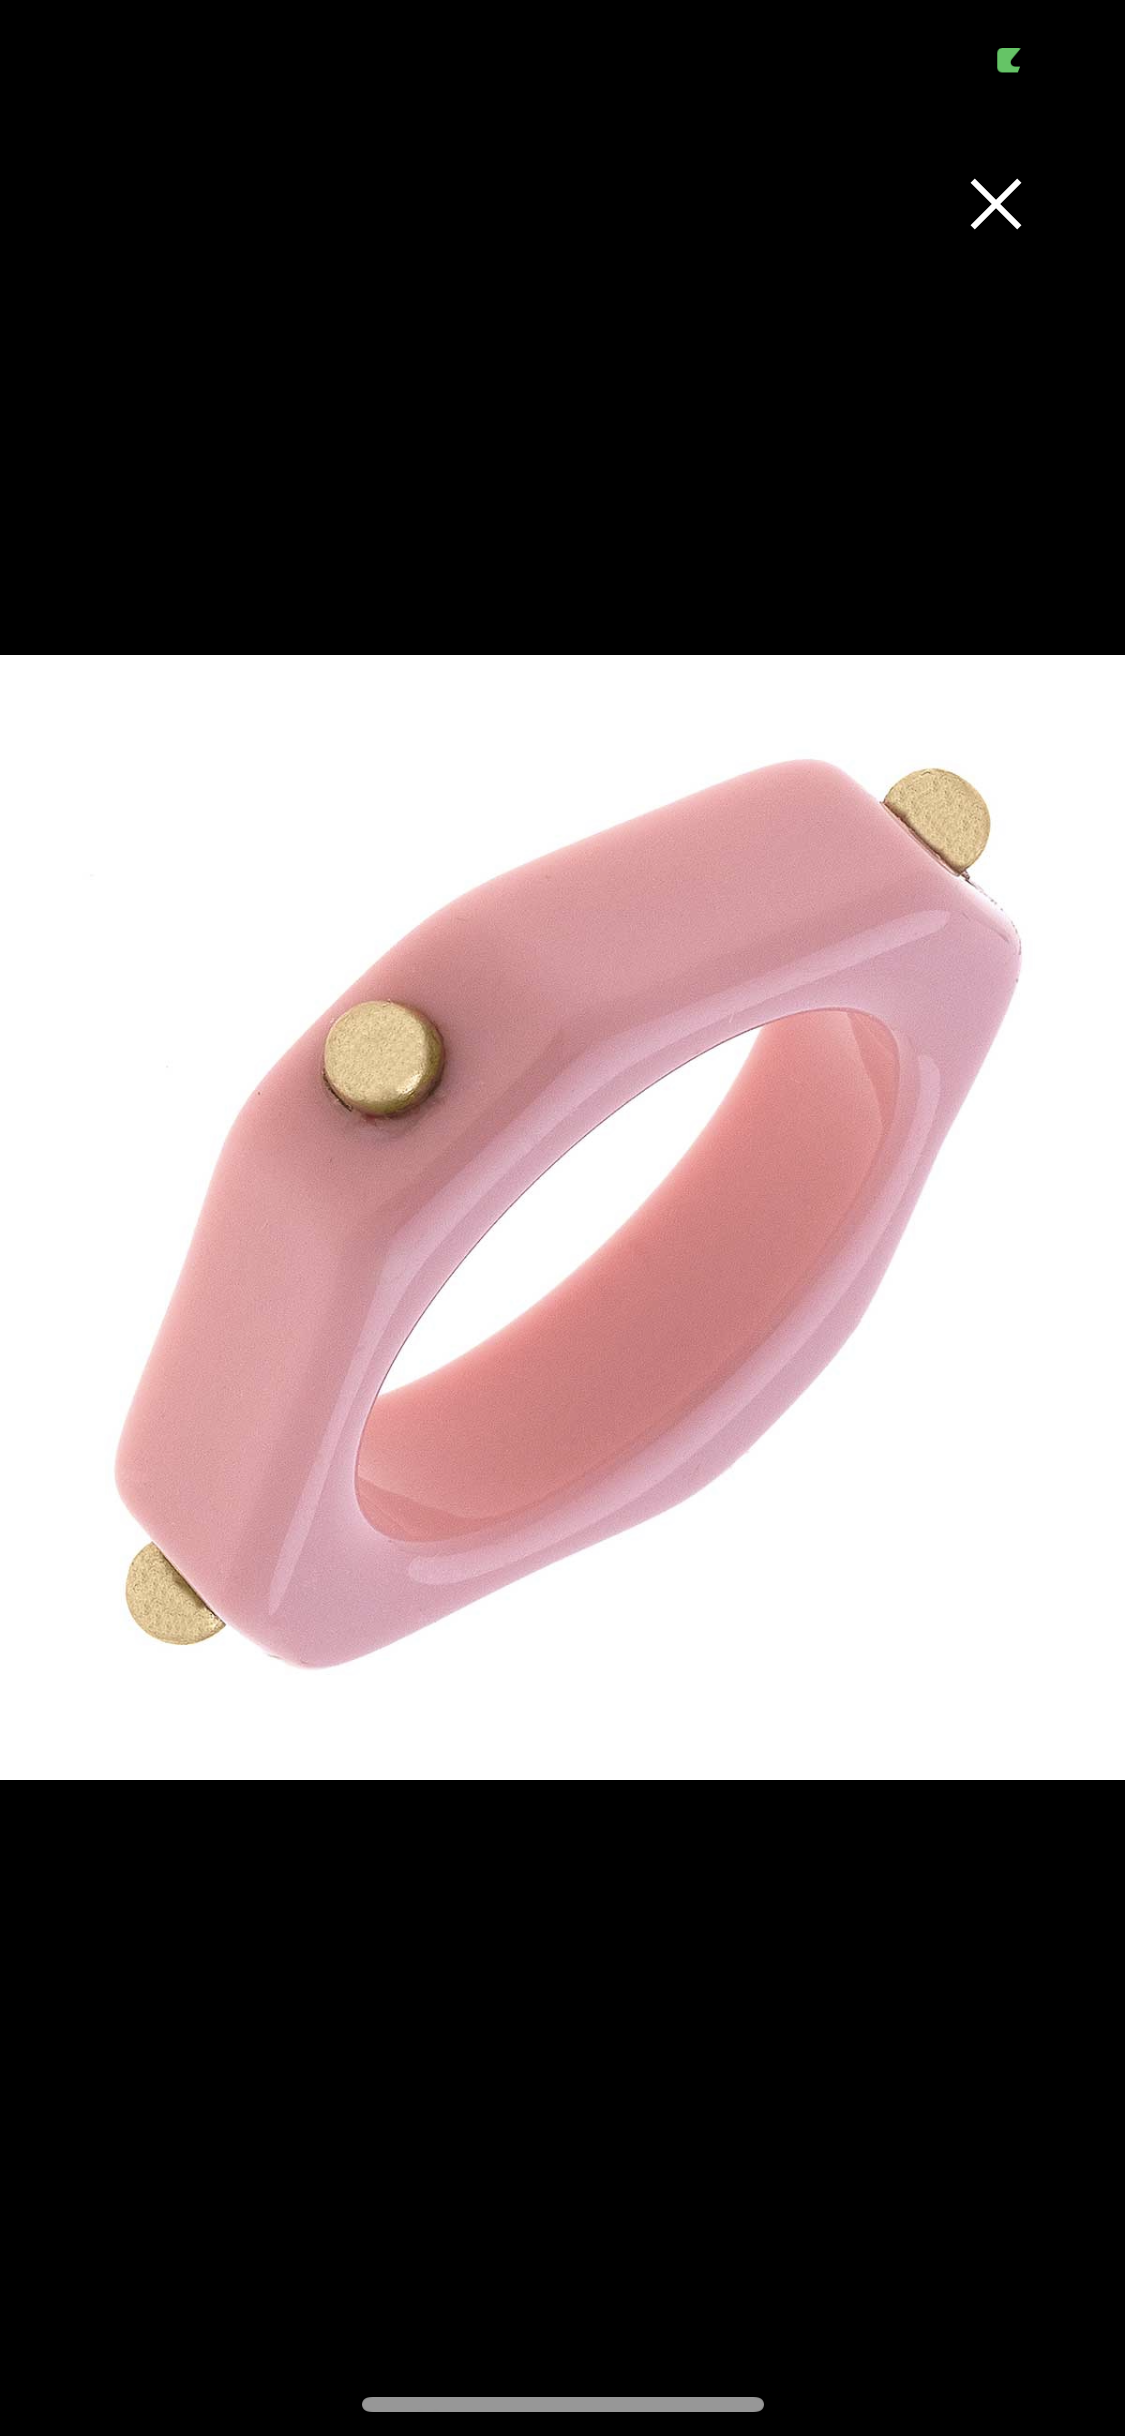 Canvas Shiloh Studded Ring - Pink Resin